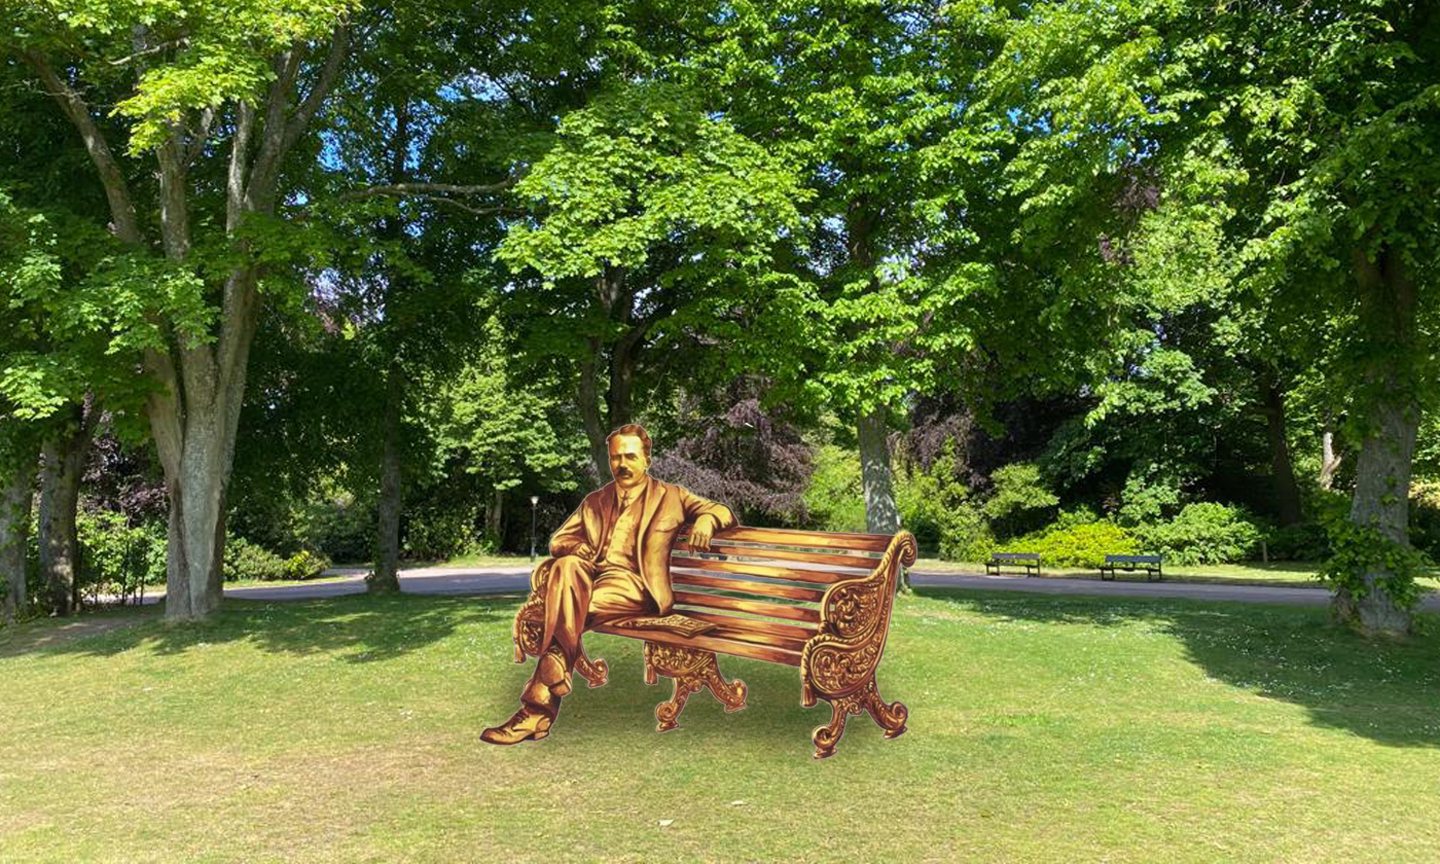 An artistic impression of the JJR Macleod statue planned for Duthie Park, in place in the preferred location being put to councillors on Tuesday. Picture by Mhorvan Park/DCT Media and Aberdeen City Council.